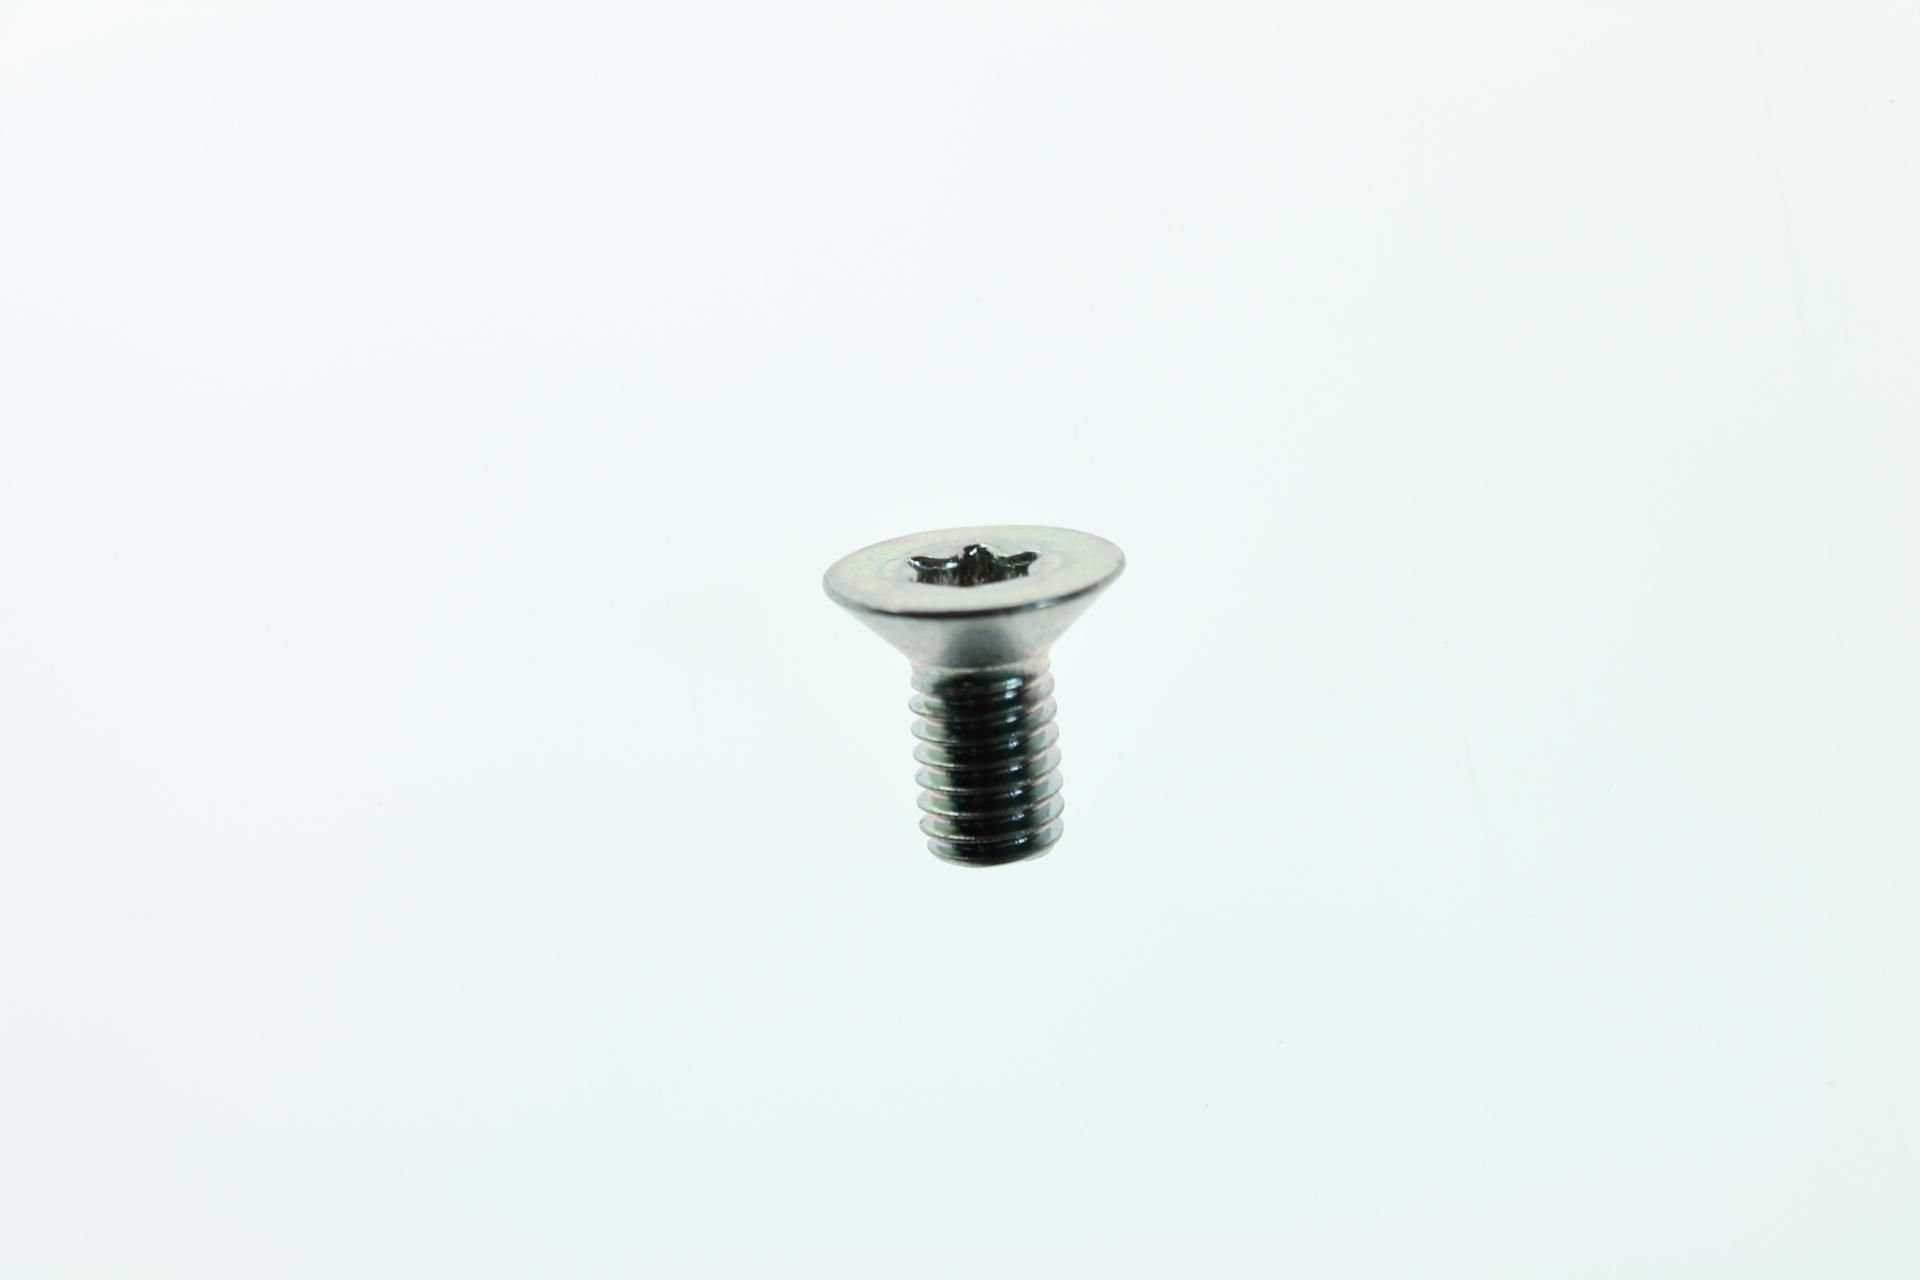 90149-06074-00 Superseded by 90151-06052-00 - SCREW, COUNTERSUNK